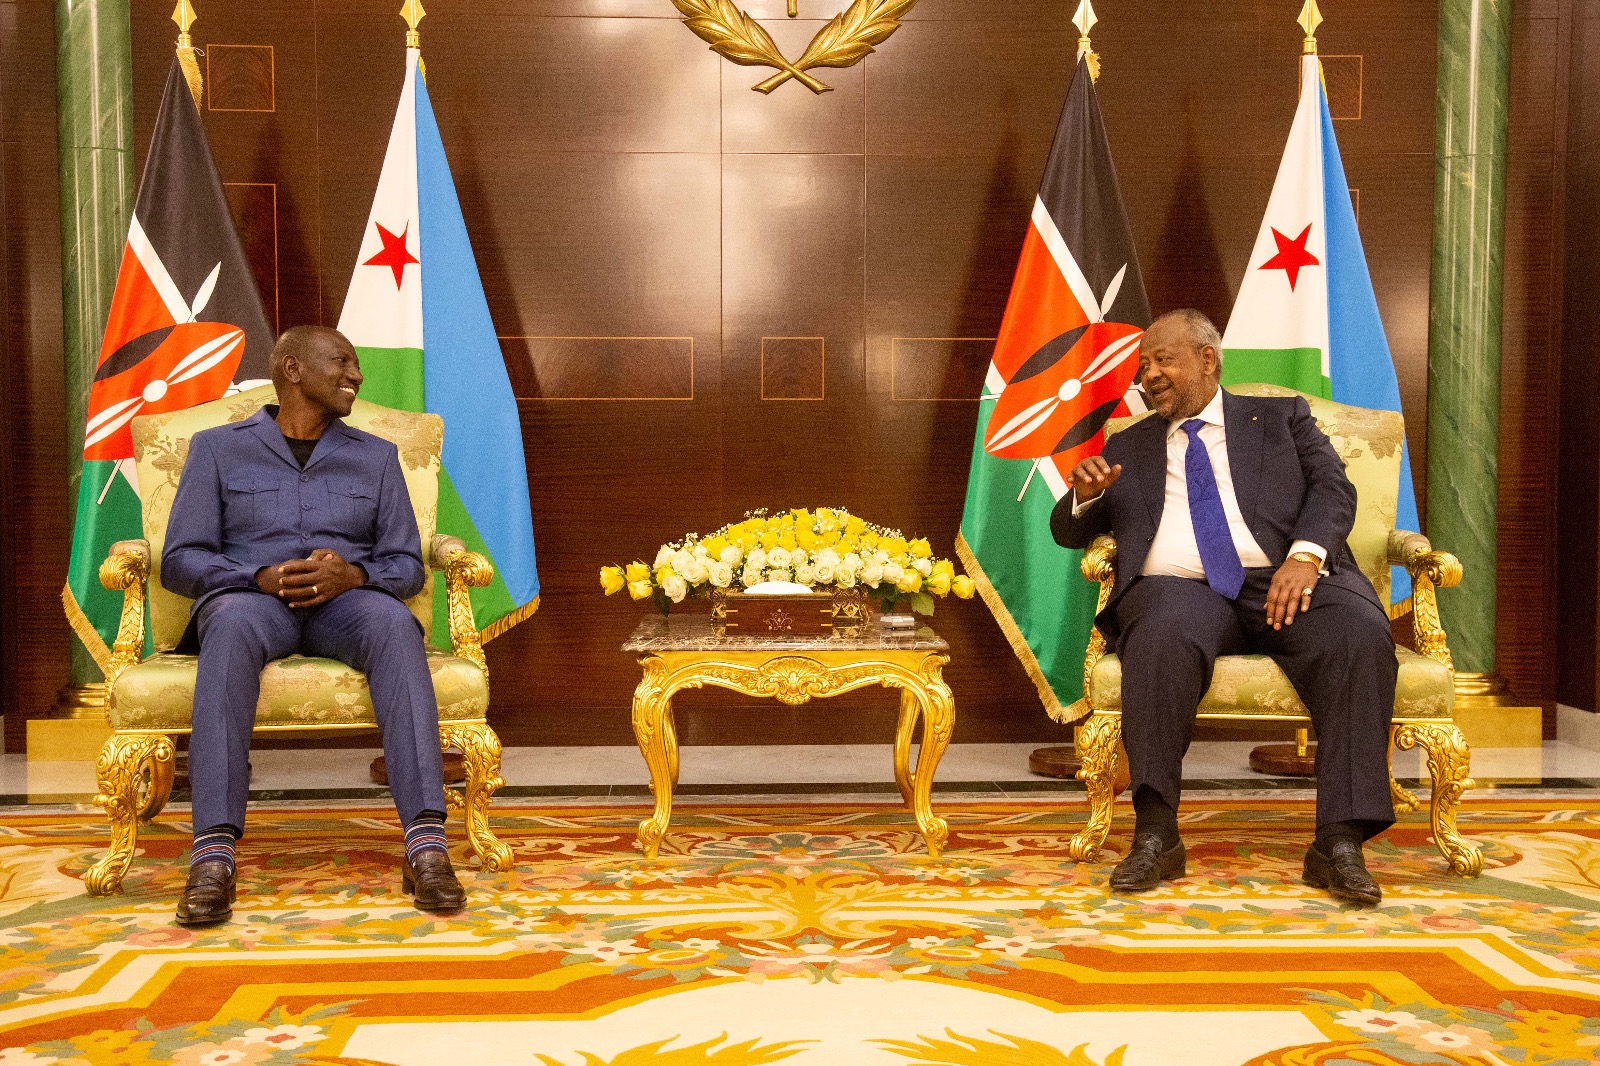 HIGHLIGHTS FROM THE MEETING BETWEEN PRESIDENT WILLIAM RUTO AND HIS DJIBOUTI COUNTERPART ISMAIL OMAR GUELLEH 